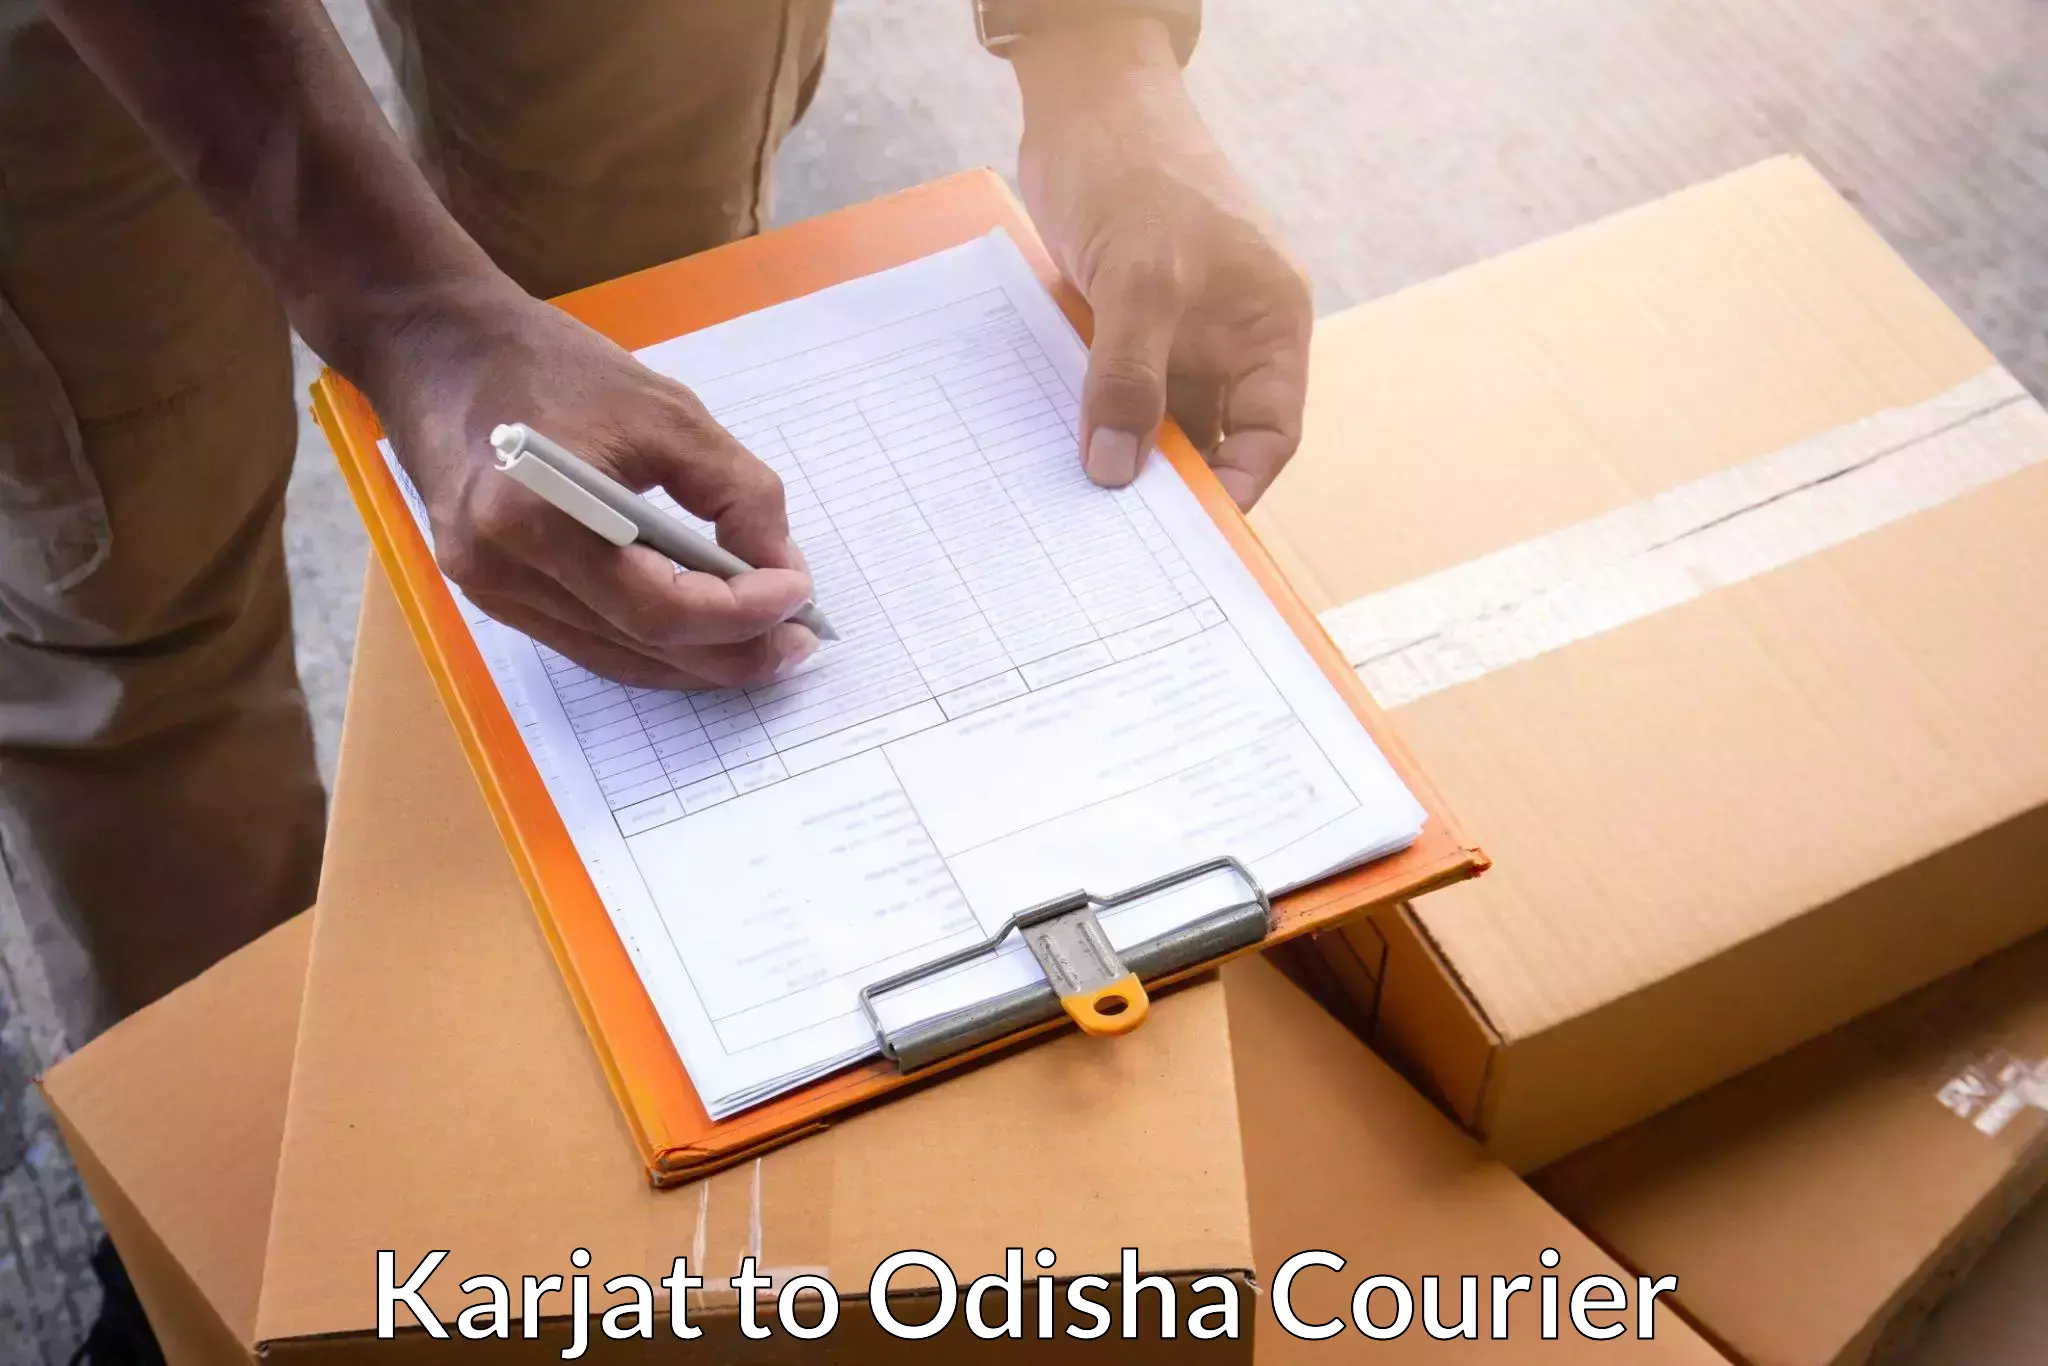 Reliable shipping partners Karjat to Umerkote